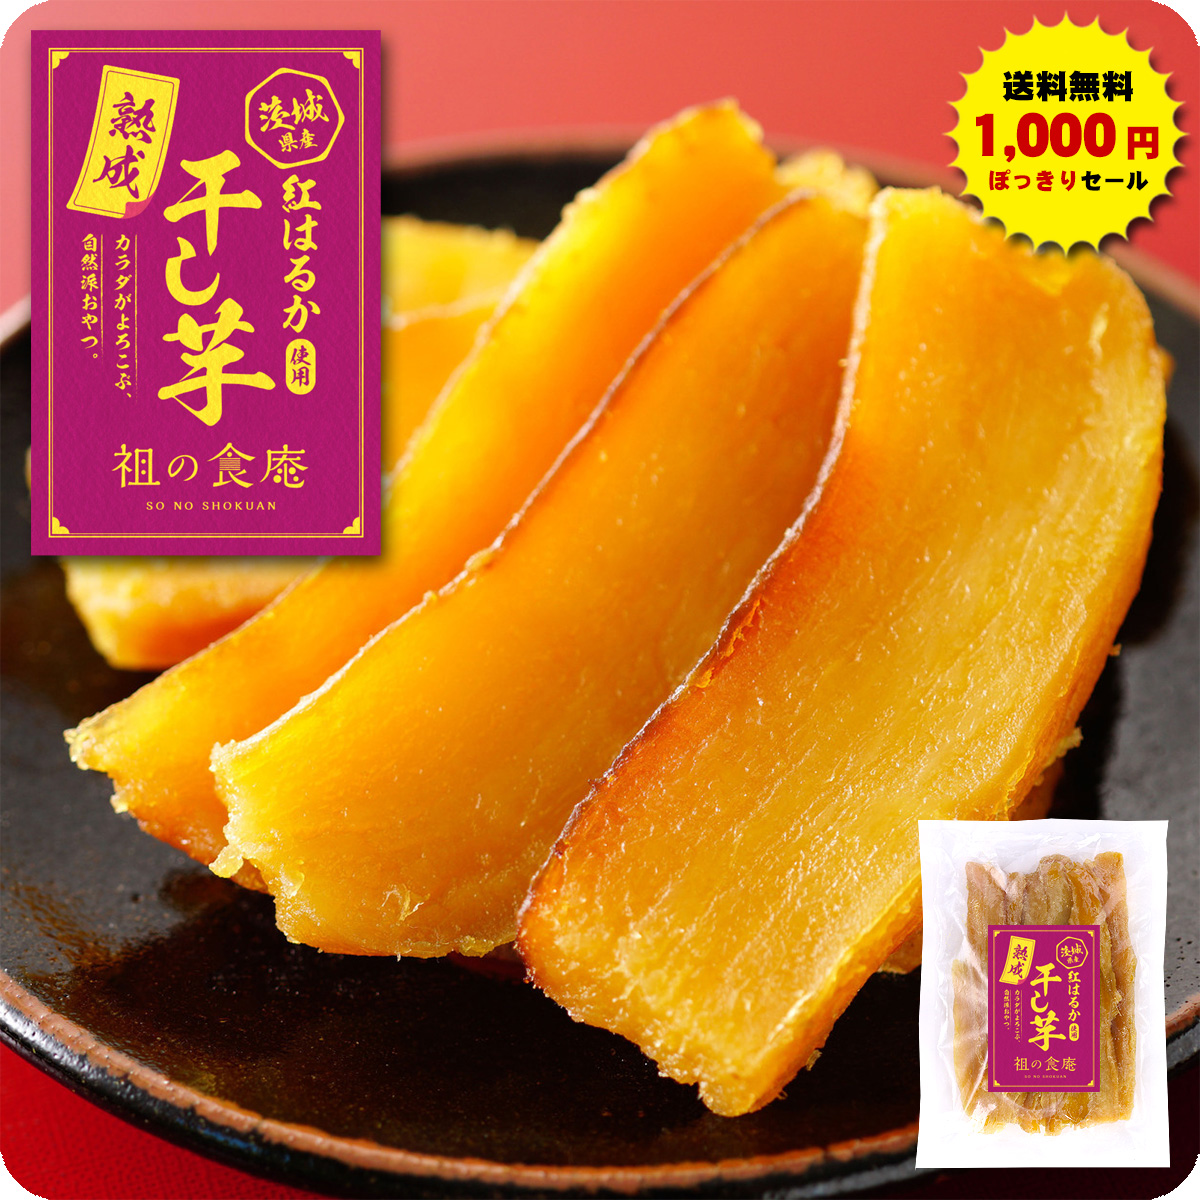  free shipping 1,000 jpy exactly! in addition, bulk buying coupon .! Ibaraki prefecture production [..]. is .. use! no addition dried sweet potato with translation / shape don't fit 230g dried ......